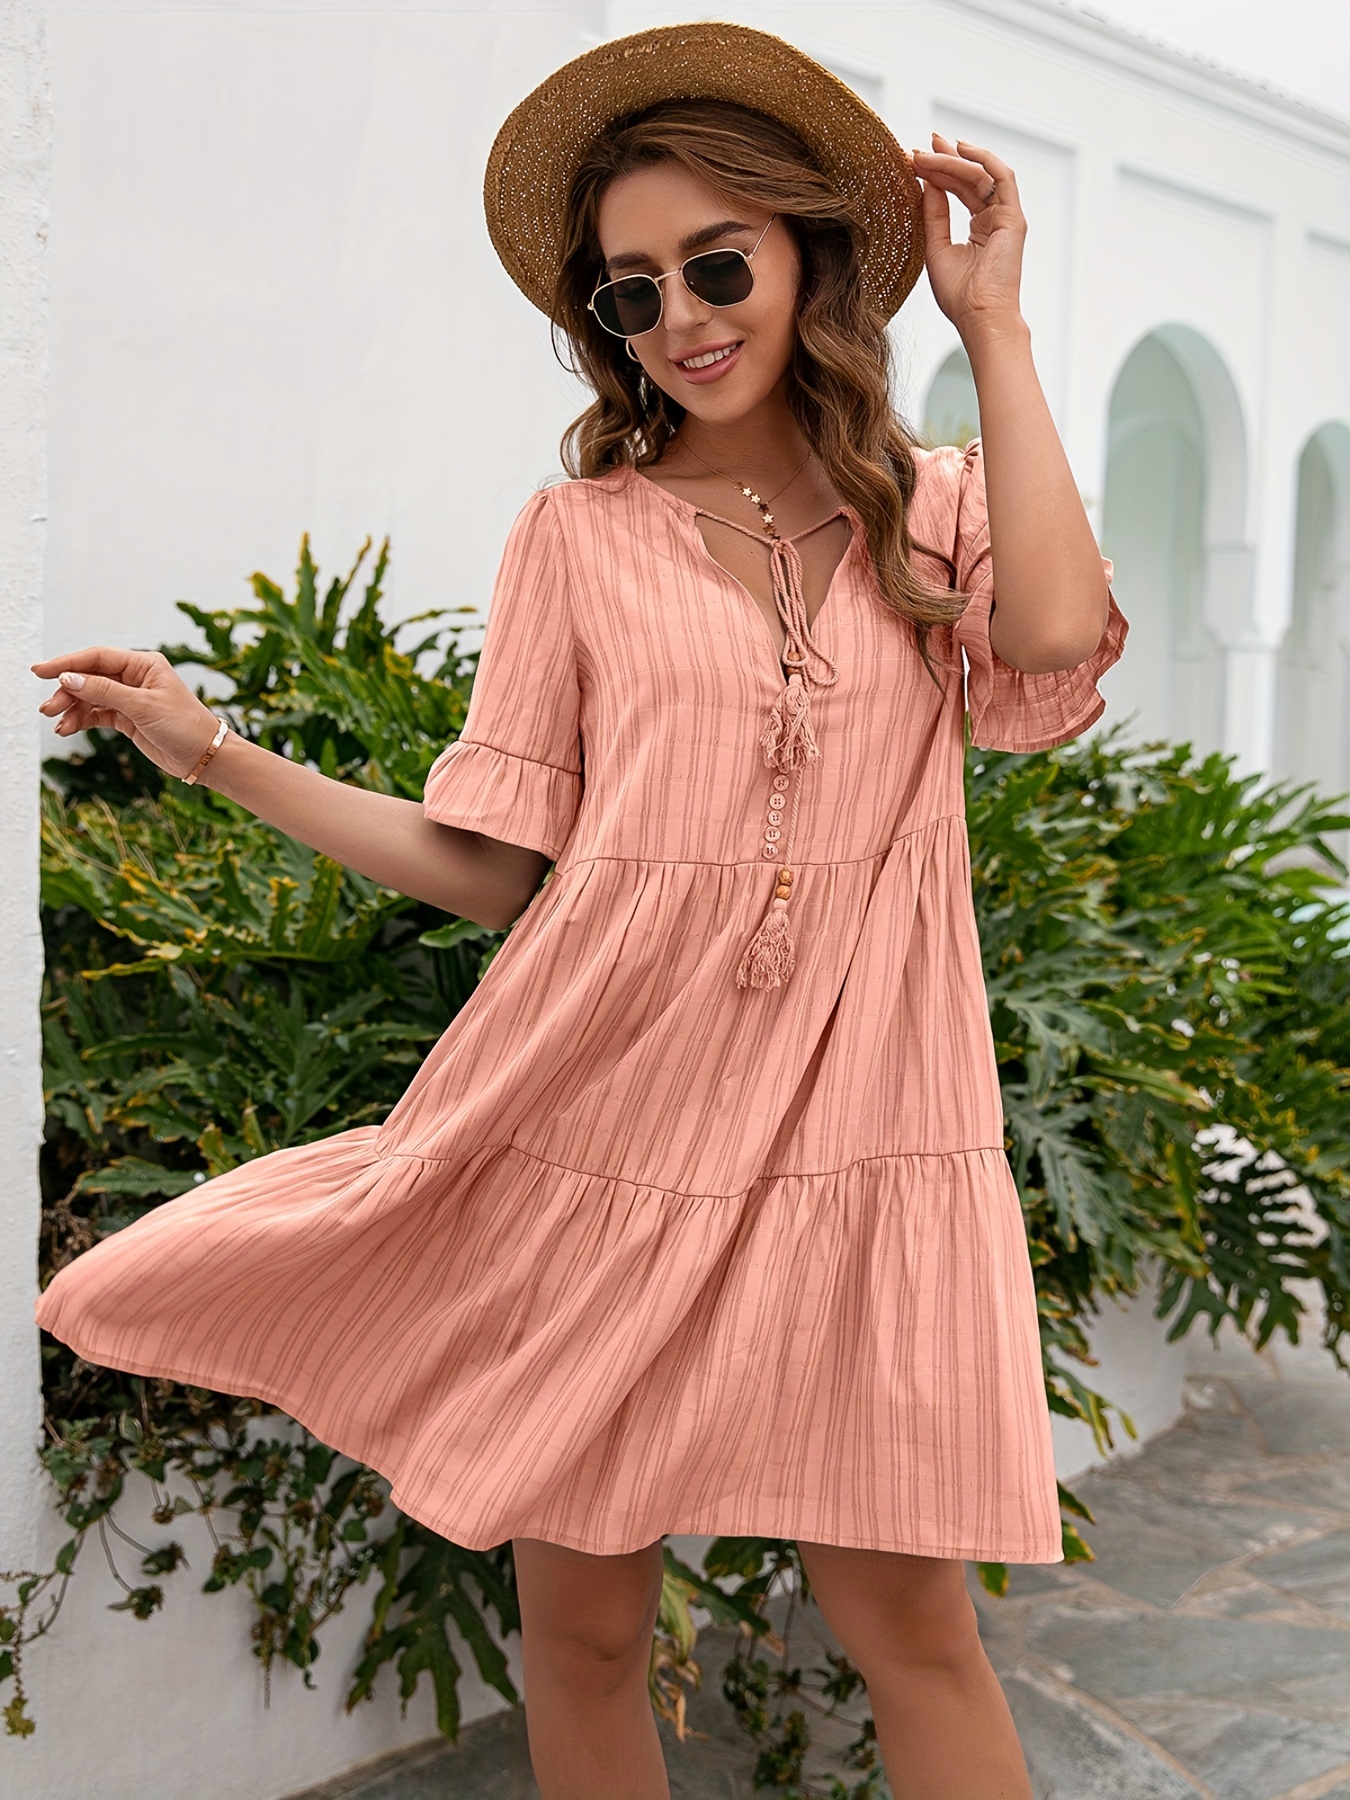 Best tiered dress - Stylish tiered dresses for summer